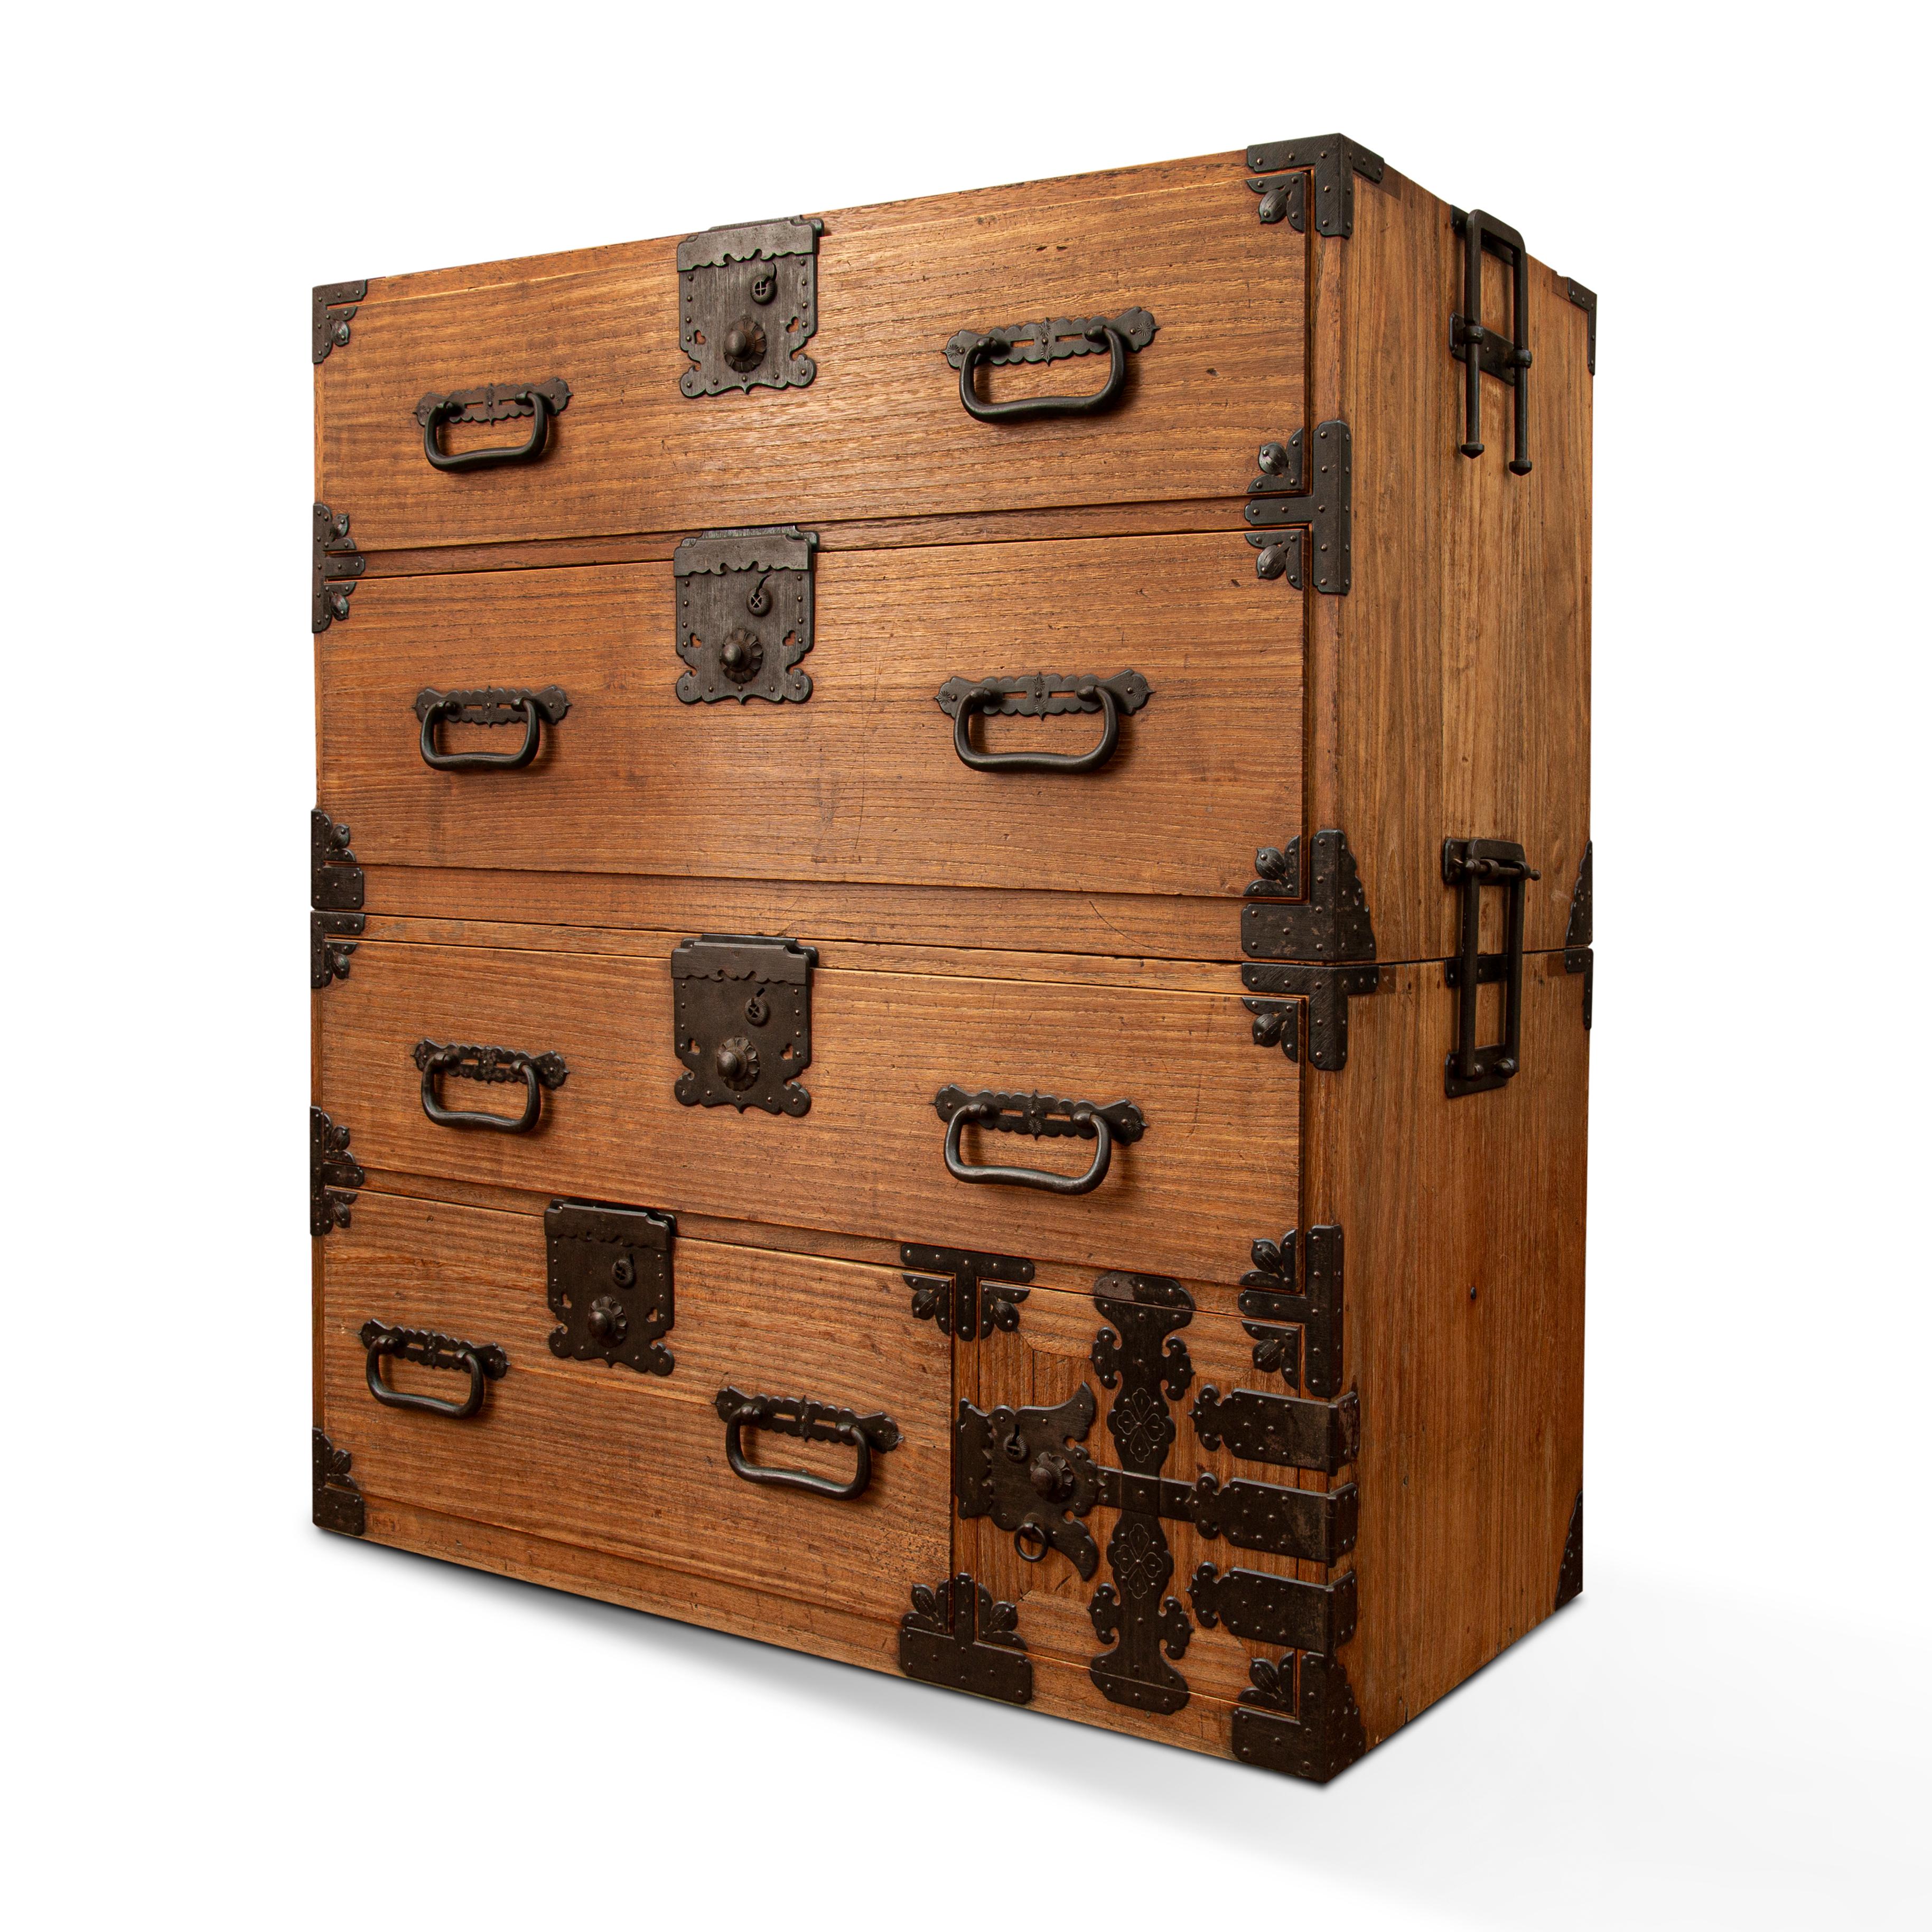 Crafted in Japan during the 20th century, this Pauownia wood (Kiri in Japanese ) tansu chest is a fine example of Japan's traditional mobile cabinetry. The long side handles flip up to permit a pole to be inserted so the chest can be carried by two